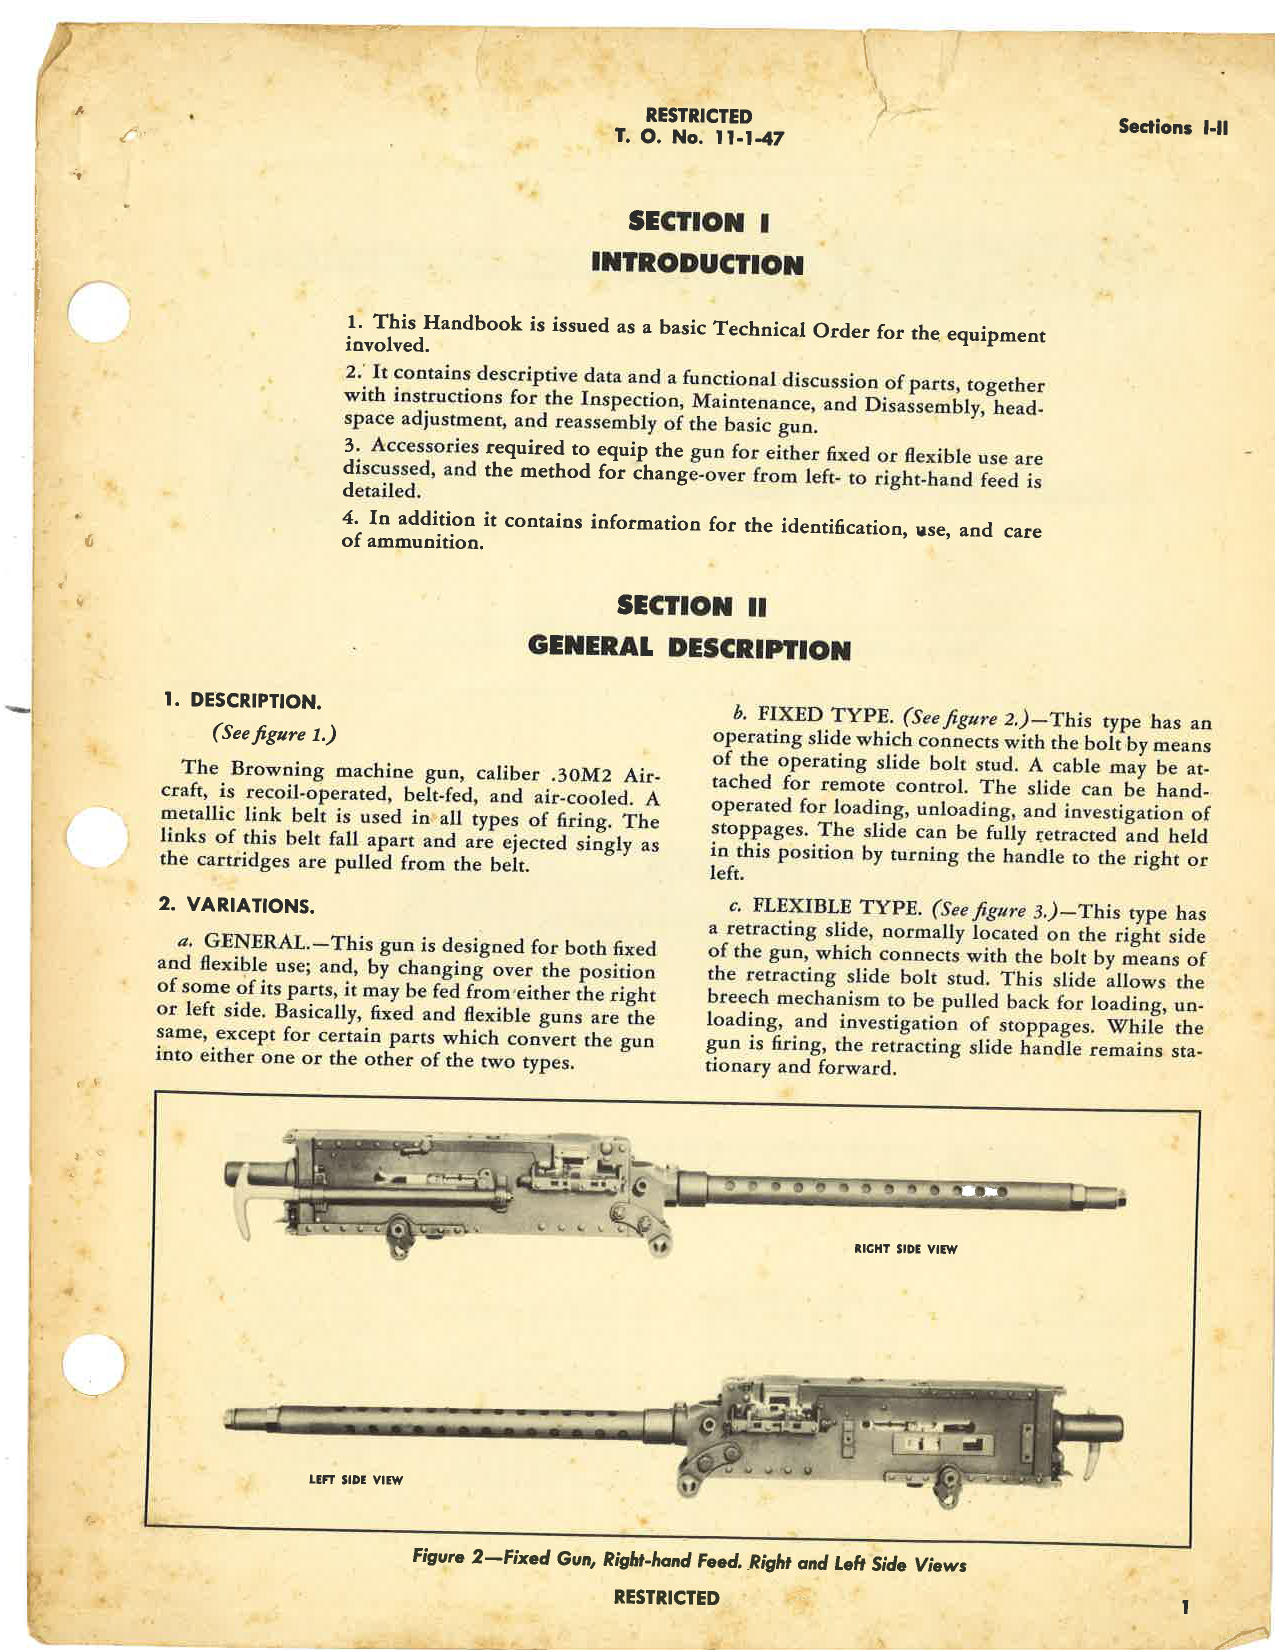 Sample page 5 from AirCorps Library document: Handbook of Instructions with Parts Catalog for Machine Gun Caliber .30 M2, Fixed and Flexible